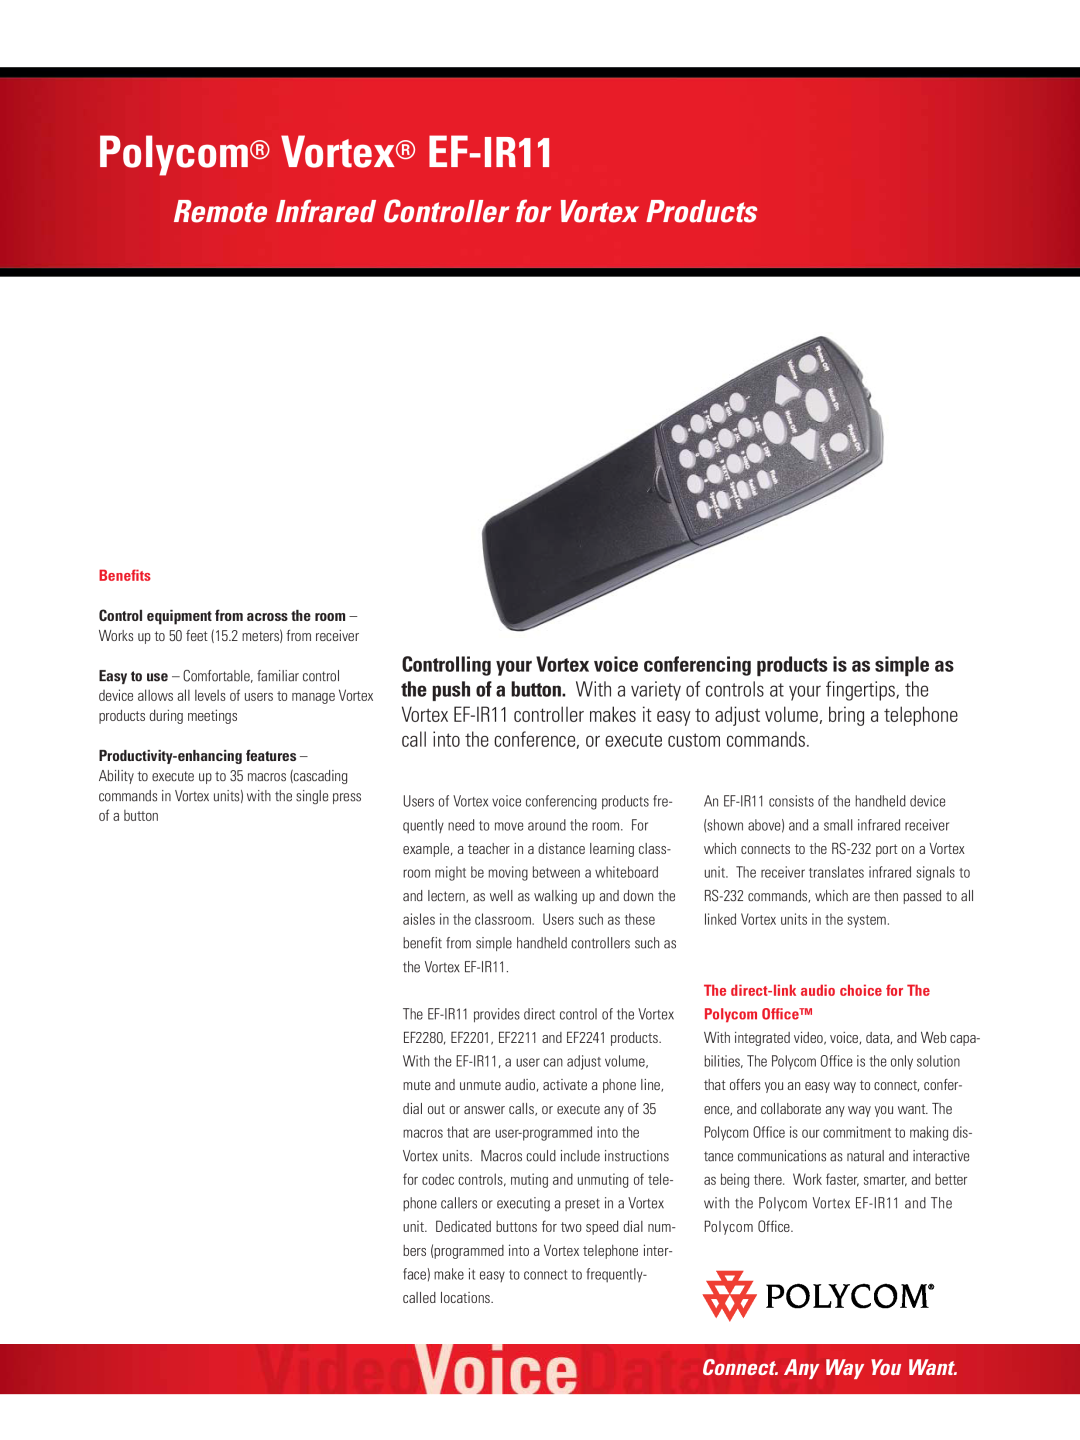 Polycom manual Polycom Vortex EF-IR11, Remote Infrared Controller for Vortex Products, Connect. Any Way You Want 